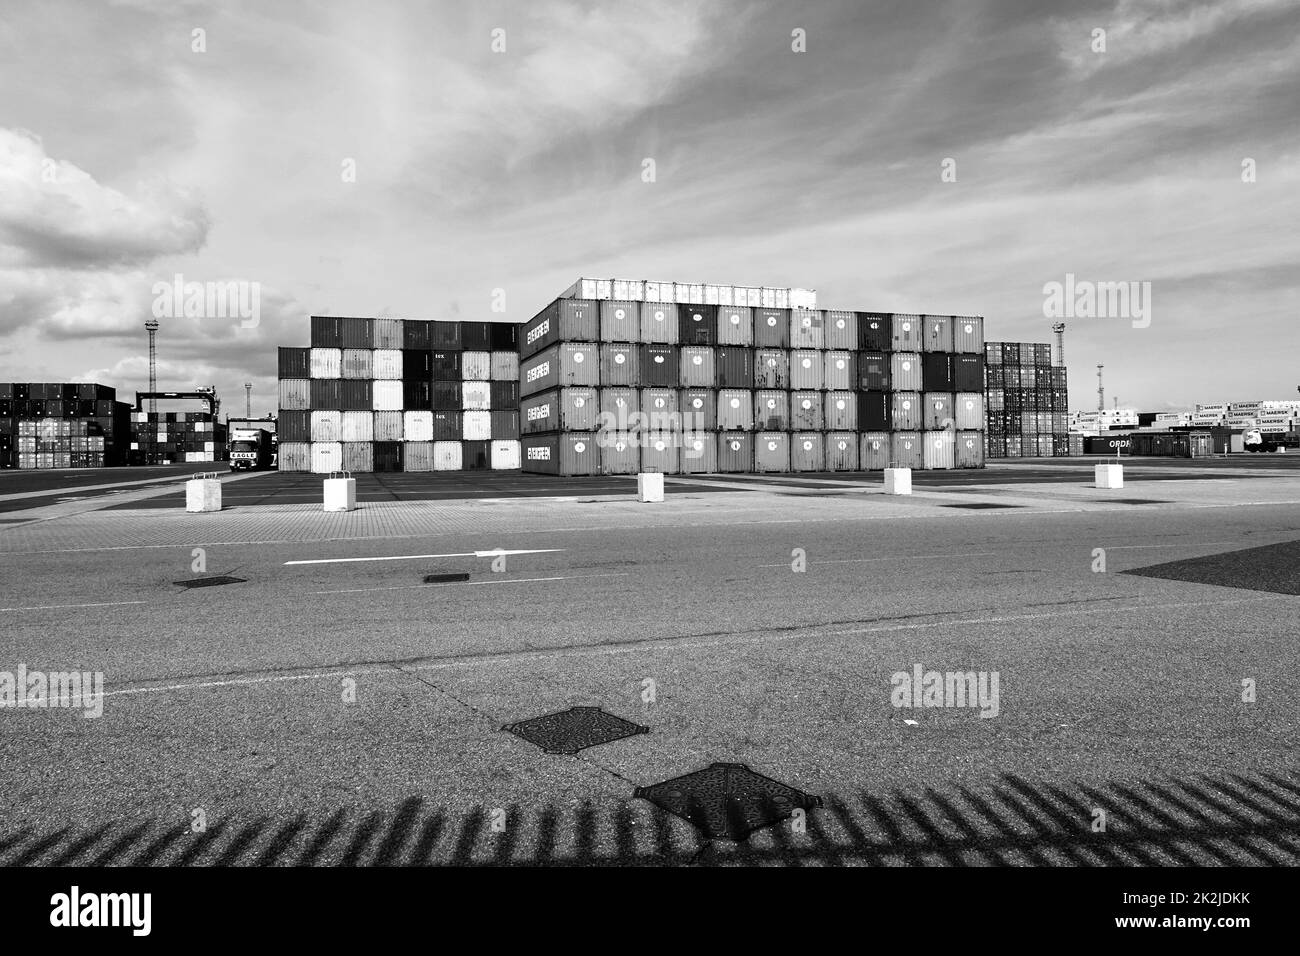 Felixstowe, Suffolk, UK - 22 September 2022 : MONO - Containers stacked at the port terminal. Stock Photo